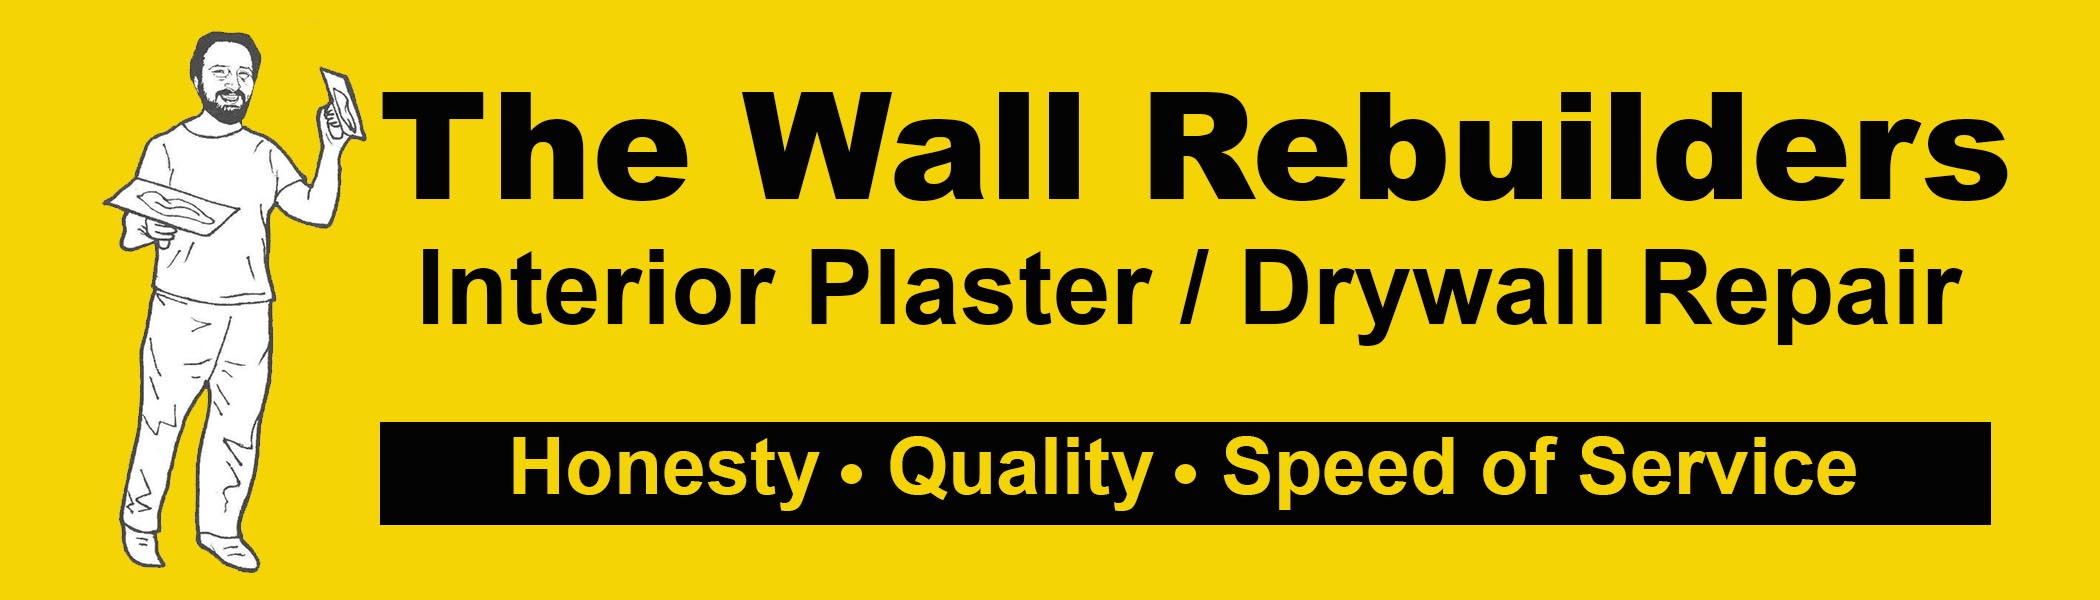 The Wall Rebuilders Logo Banner